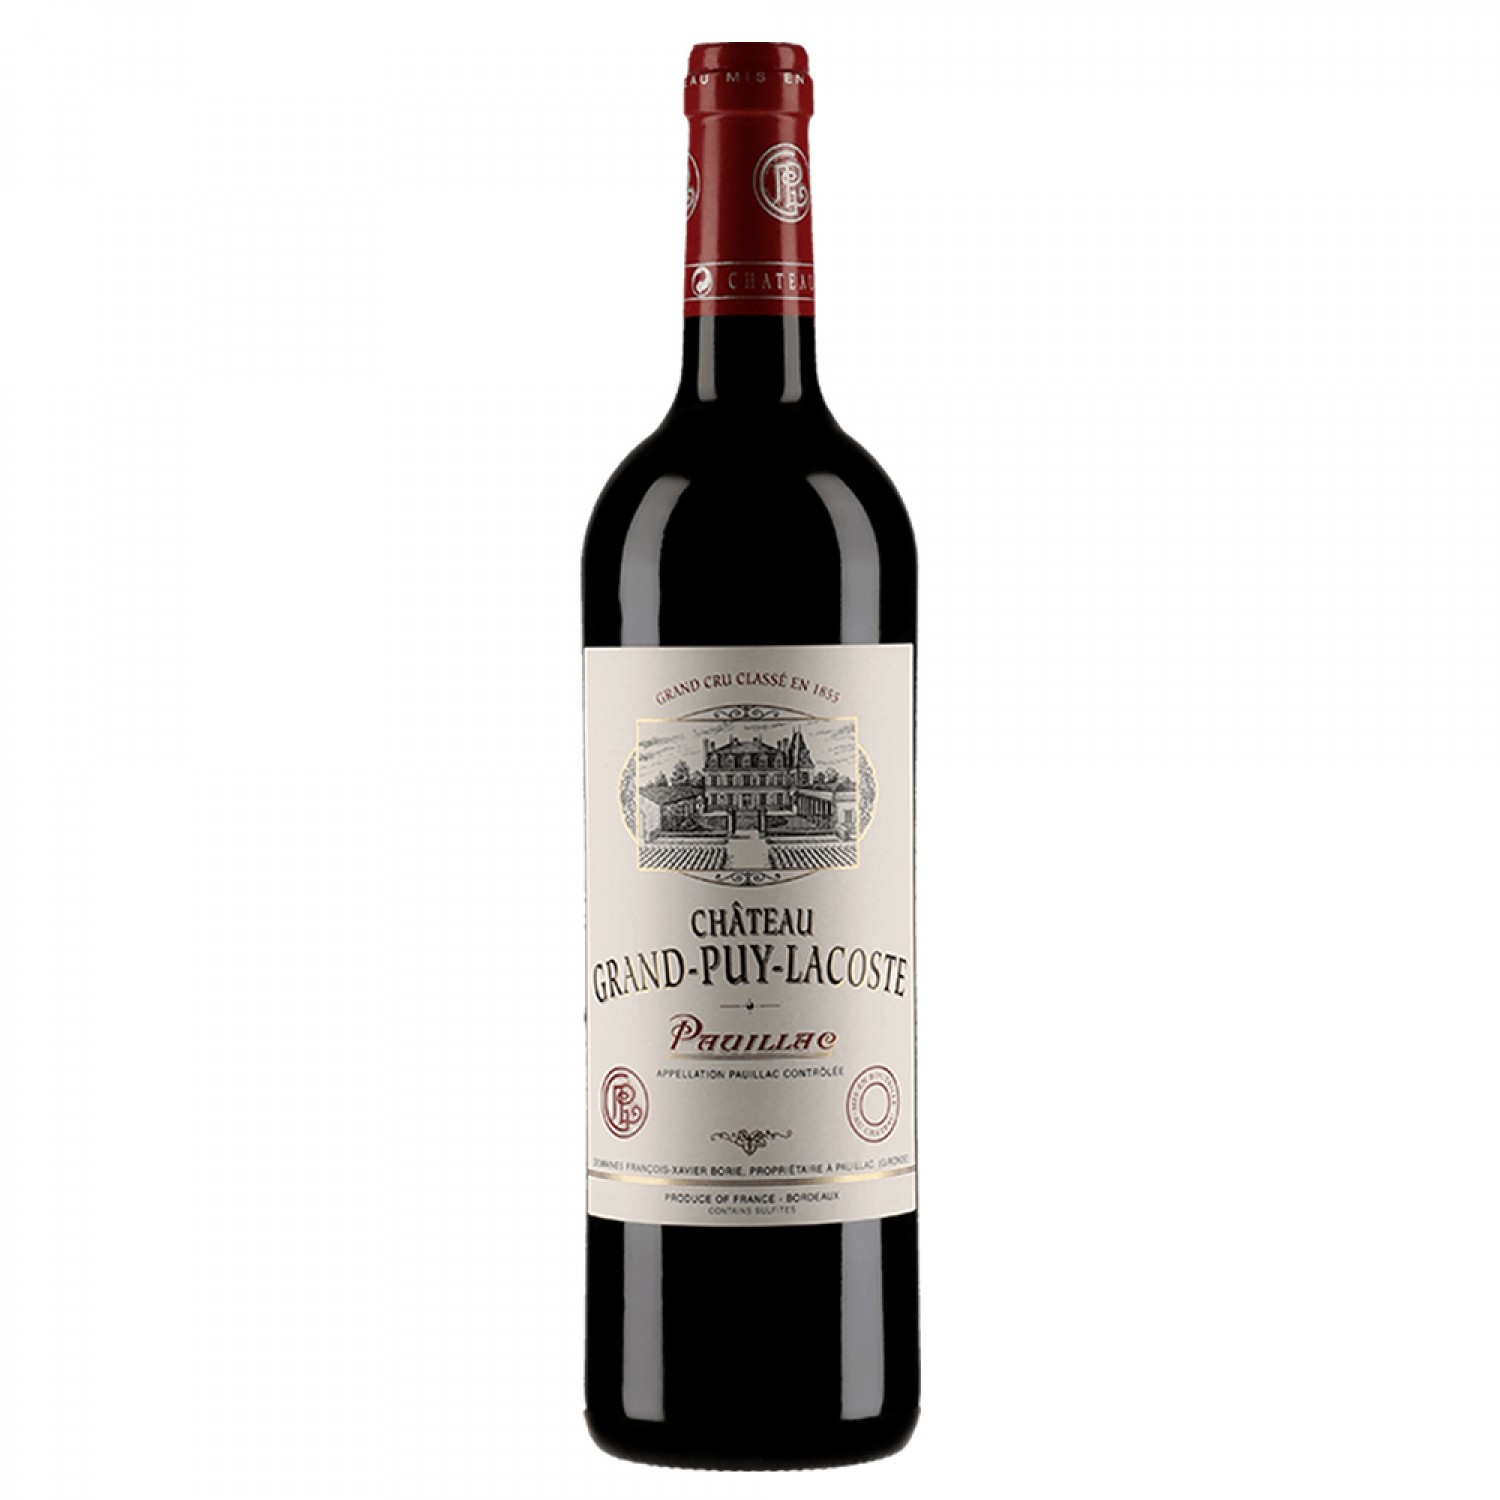 Chateau Grand Puy Lacoste 2013, Pauillac 375ml